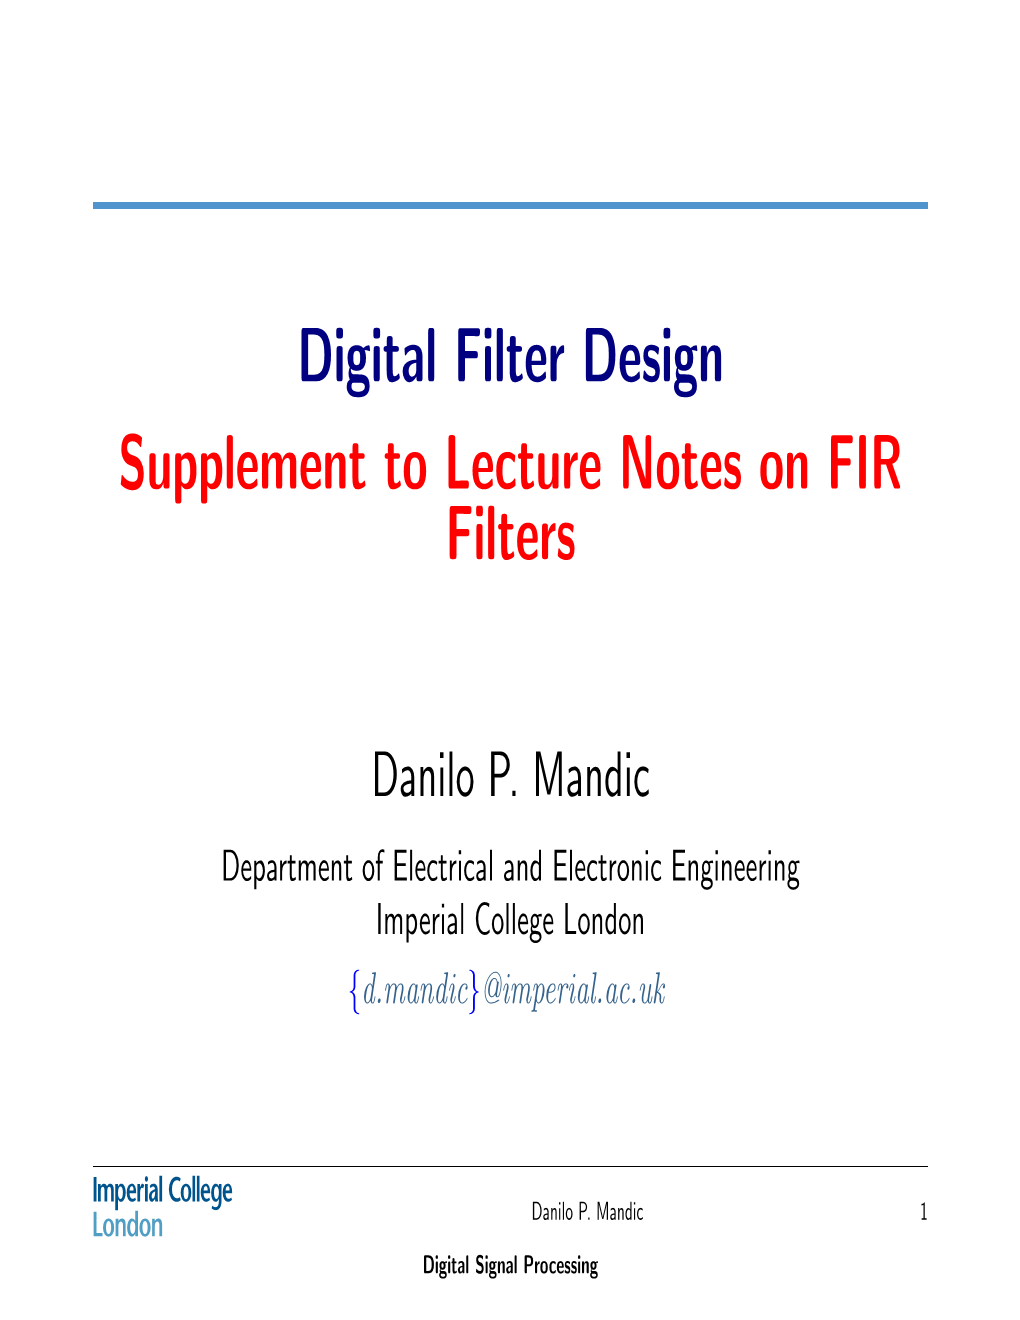 Digital Filter Design Supplement to Lecture Notes on FIR Filters